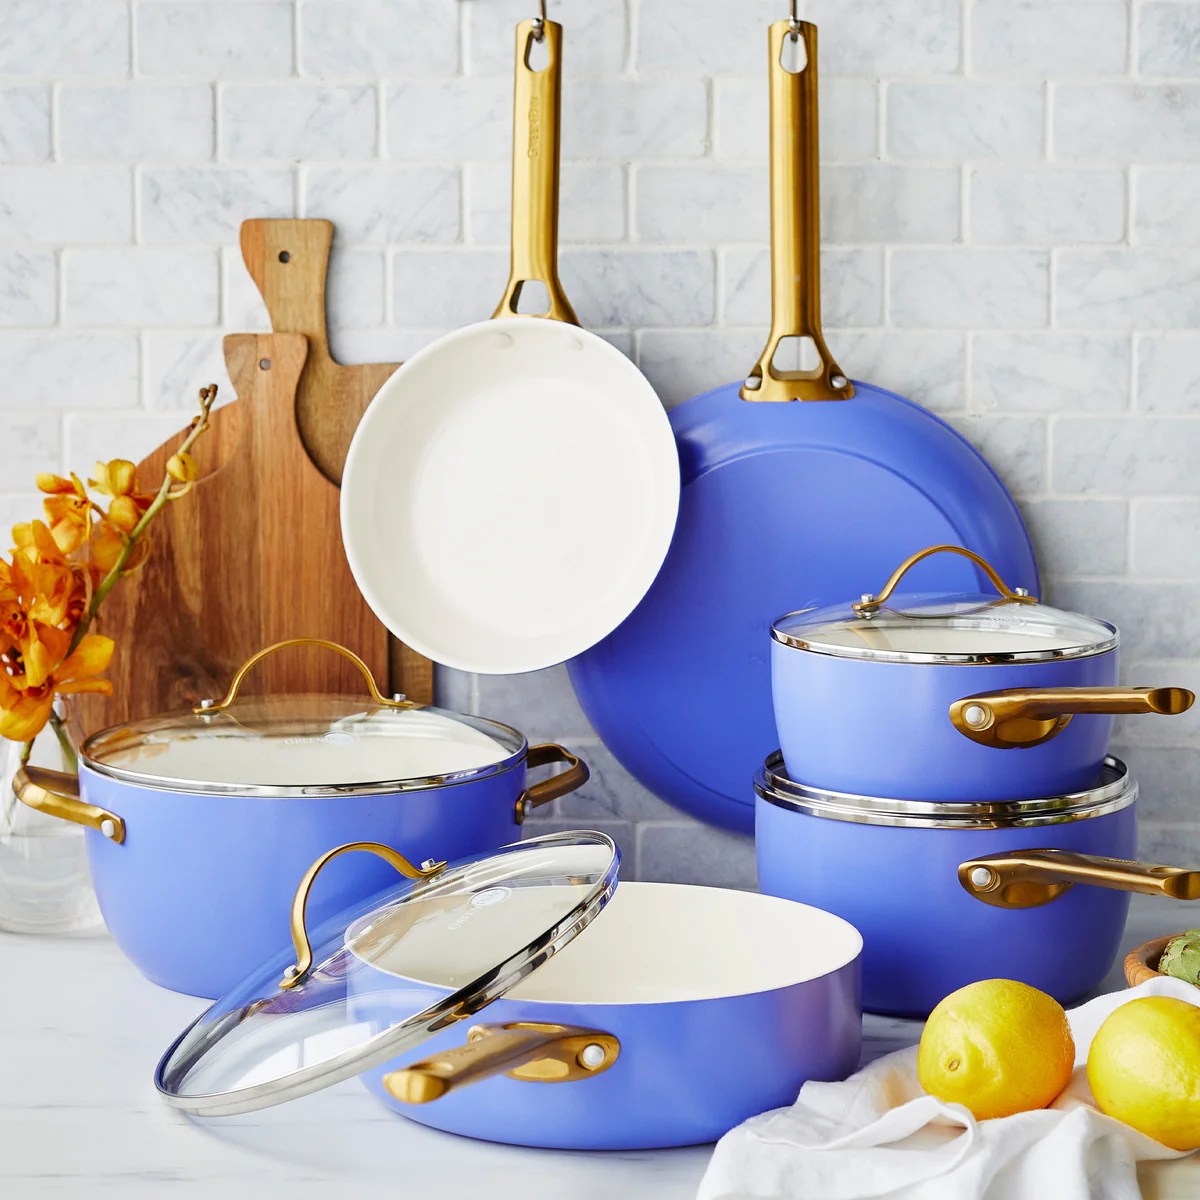 GreenPan reserve colorful pots and pans in wisteria blue